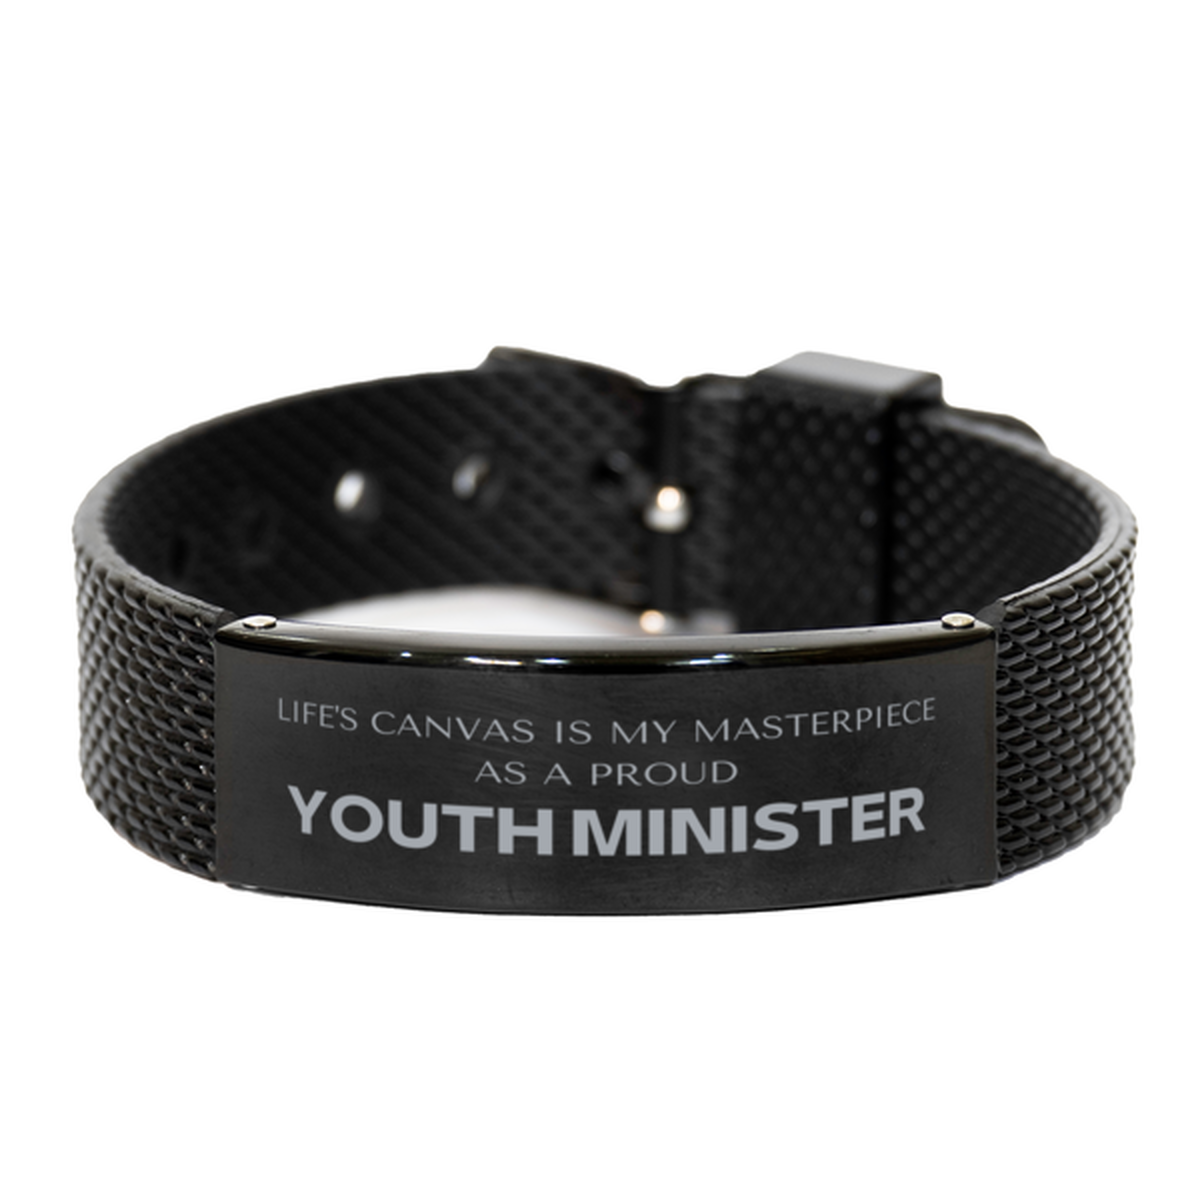 Proud Youth Minister Gifts, Life's canvas is my masterpiece, Epic Birthday Christmas Unique Black Shark Mesh Bracelet For Youth Minister, Coworkers, Men, Women, Friends